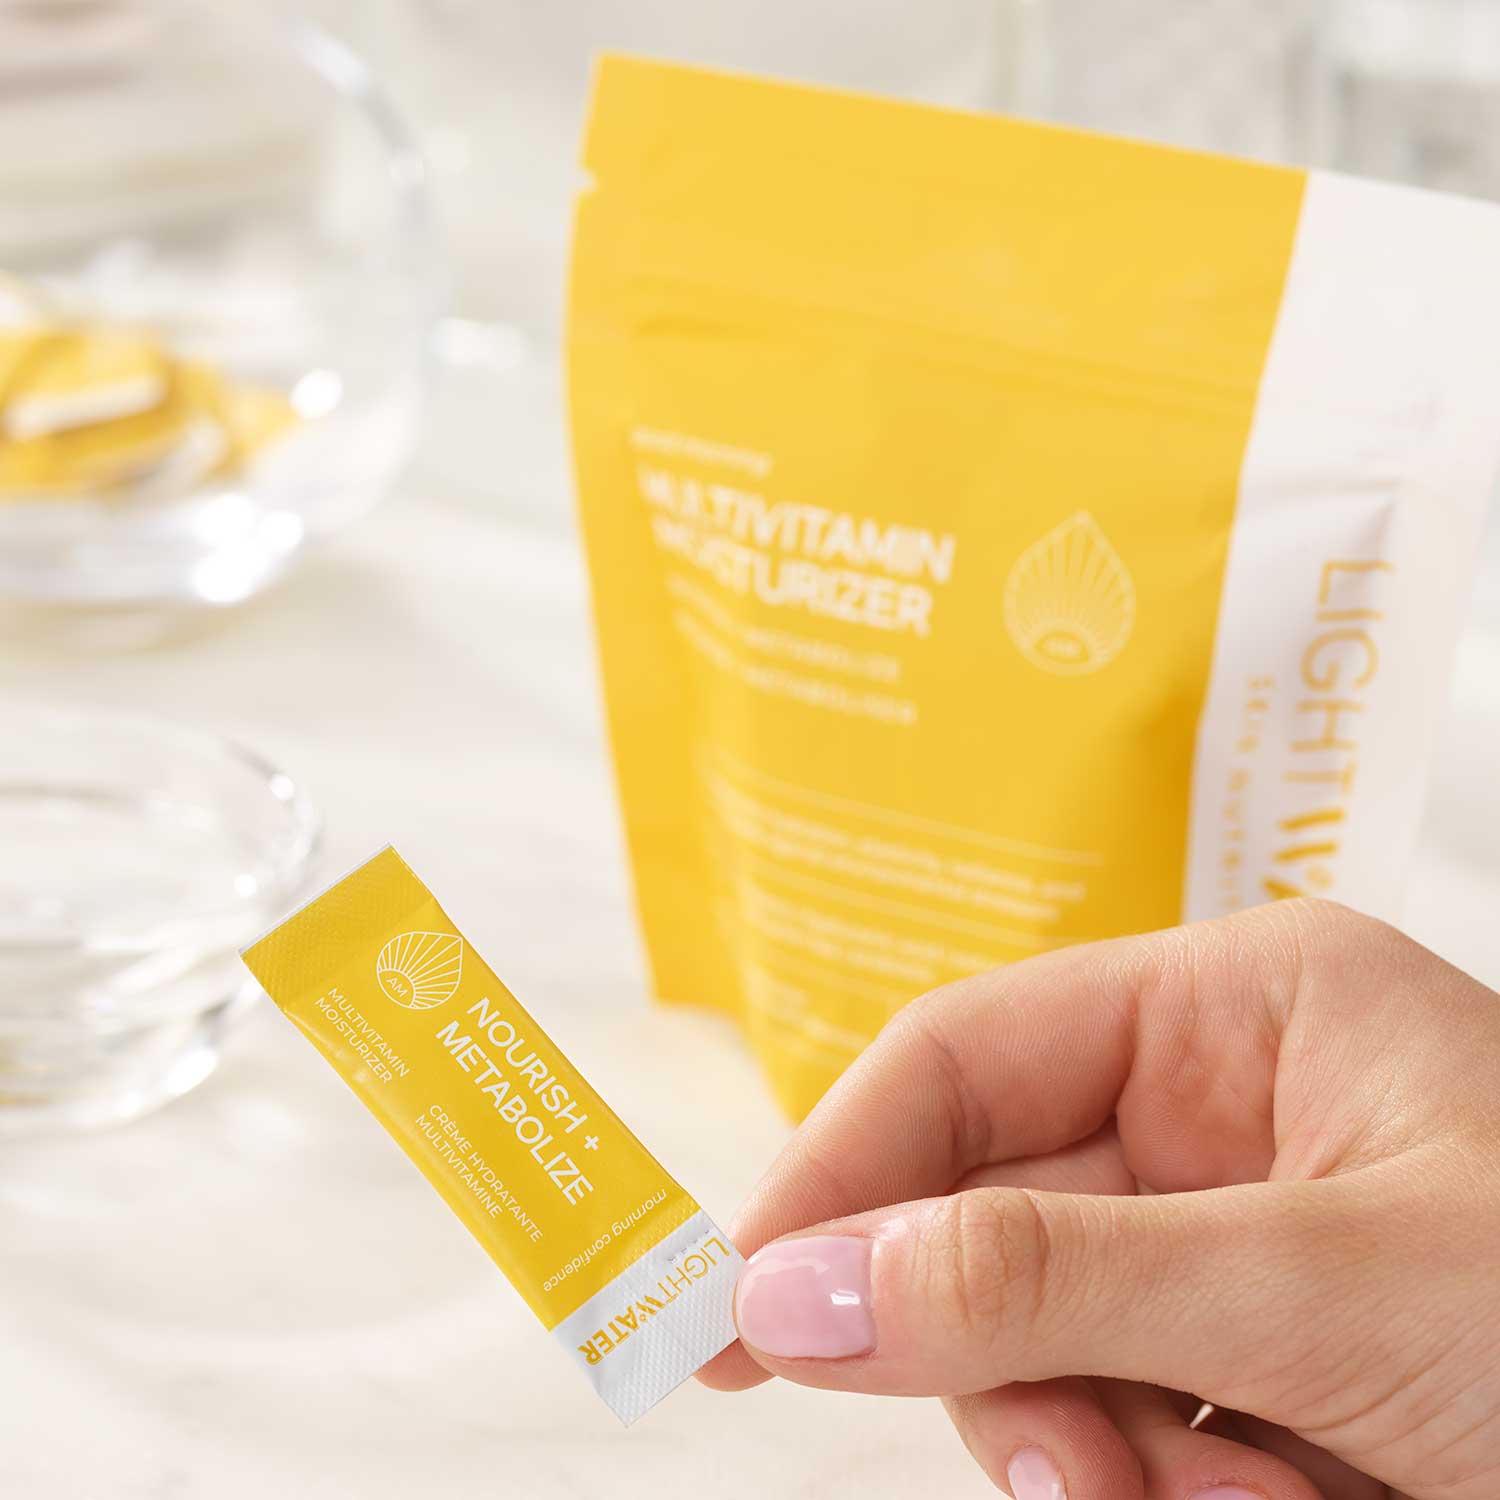 LightWater AM Multivitamin Moisturizer packaging pouch and one of its 28 daily doses in hand.